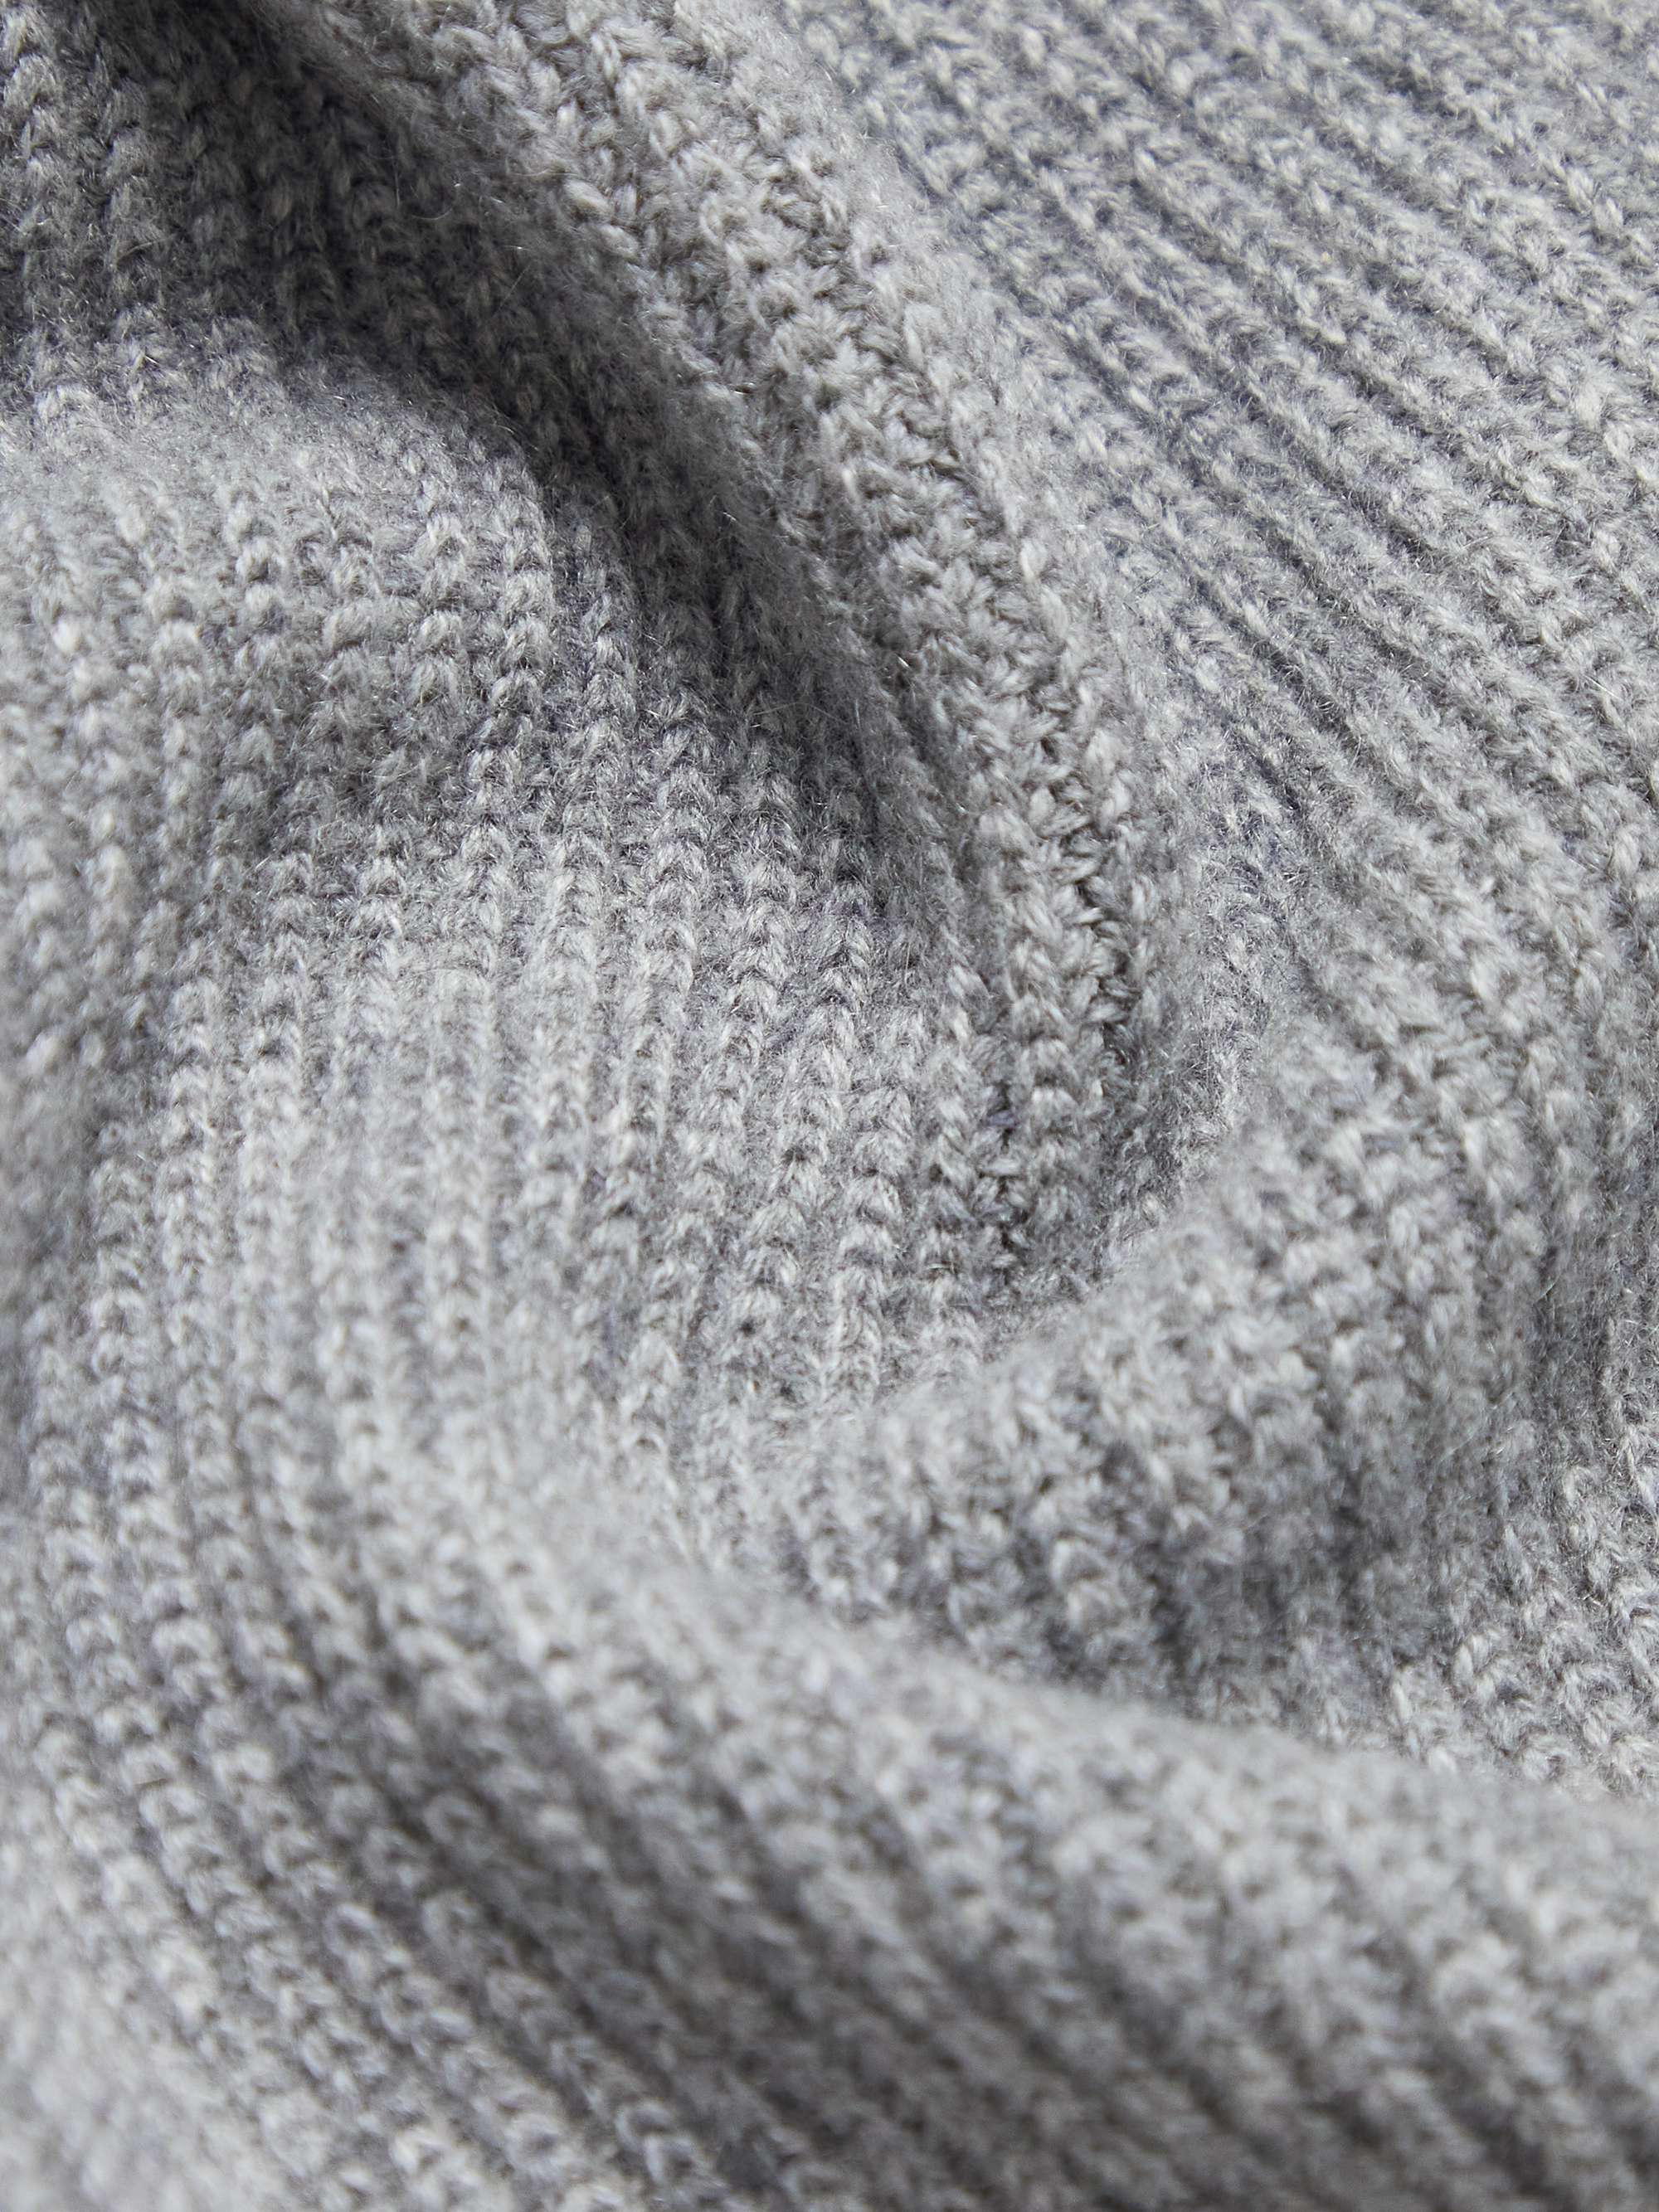 MR P. Ribbed Cashmere Scarf